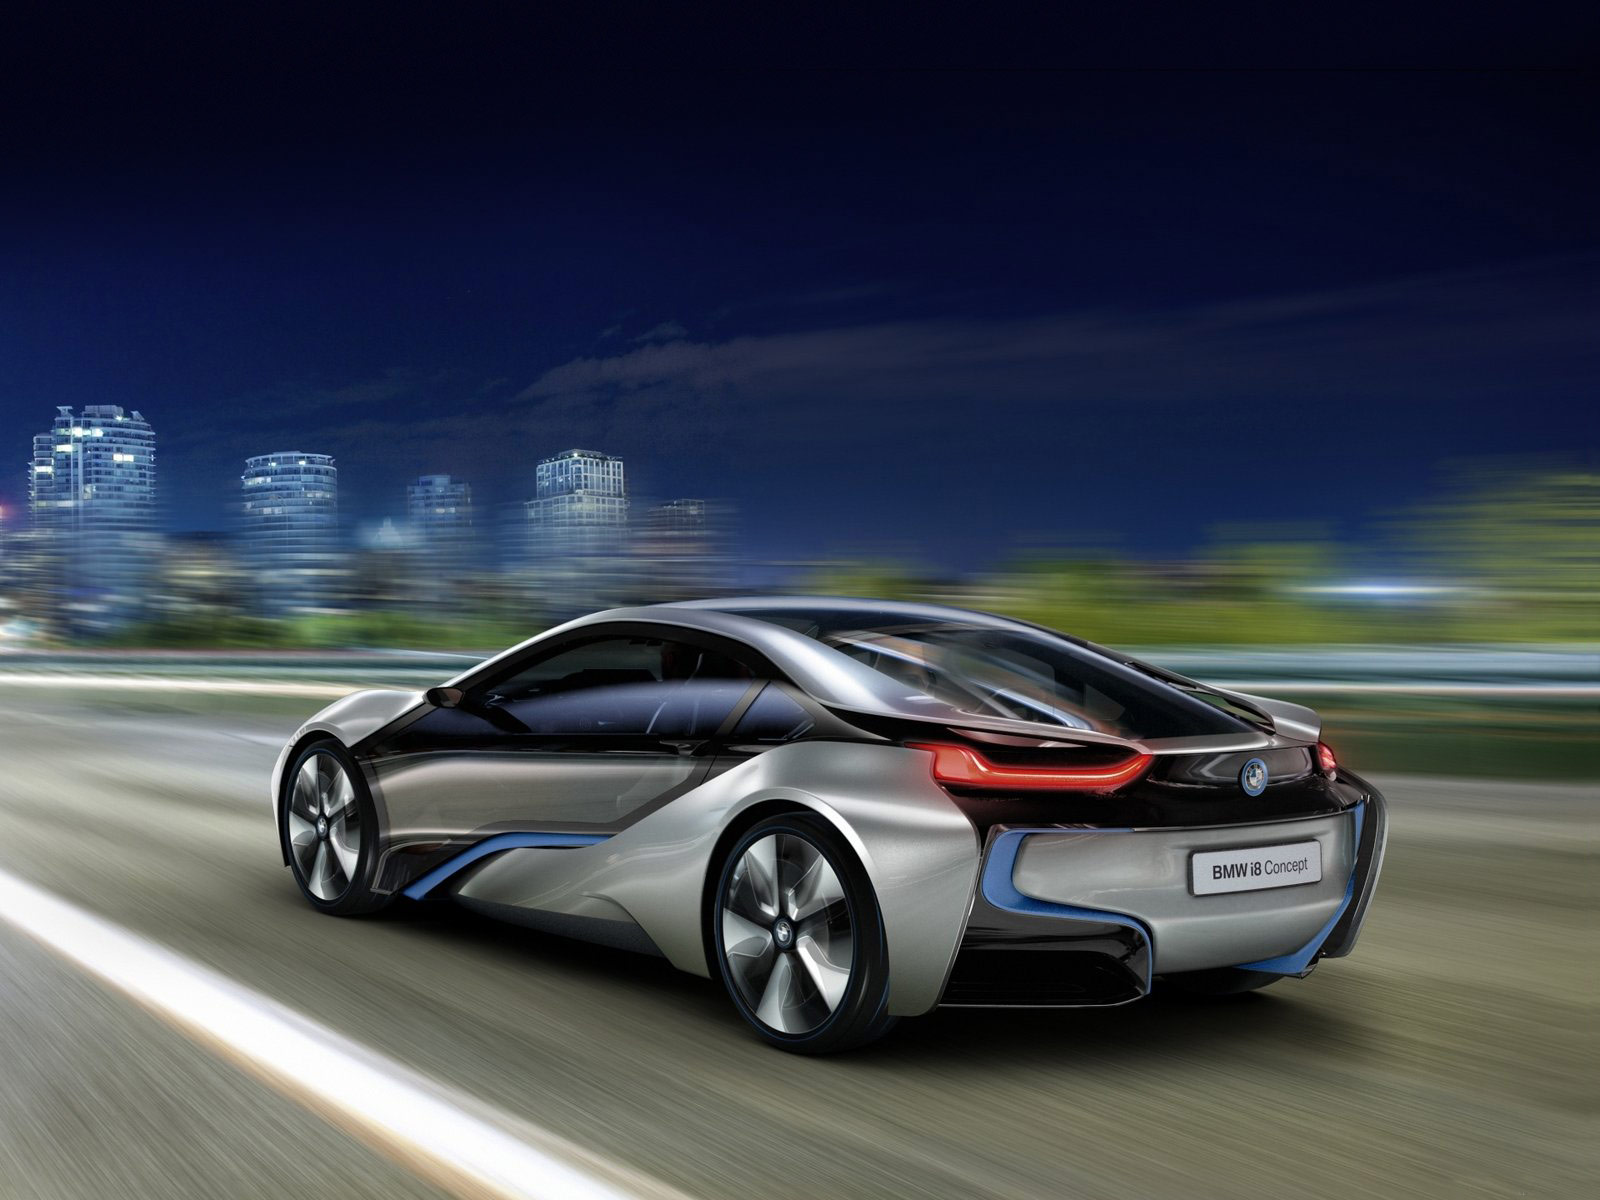 2011 BMW i8 Concept accident lawyers information, wallpaper